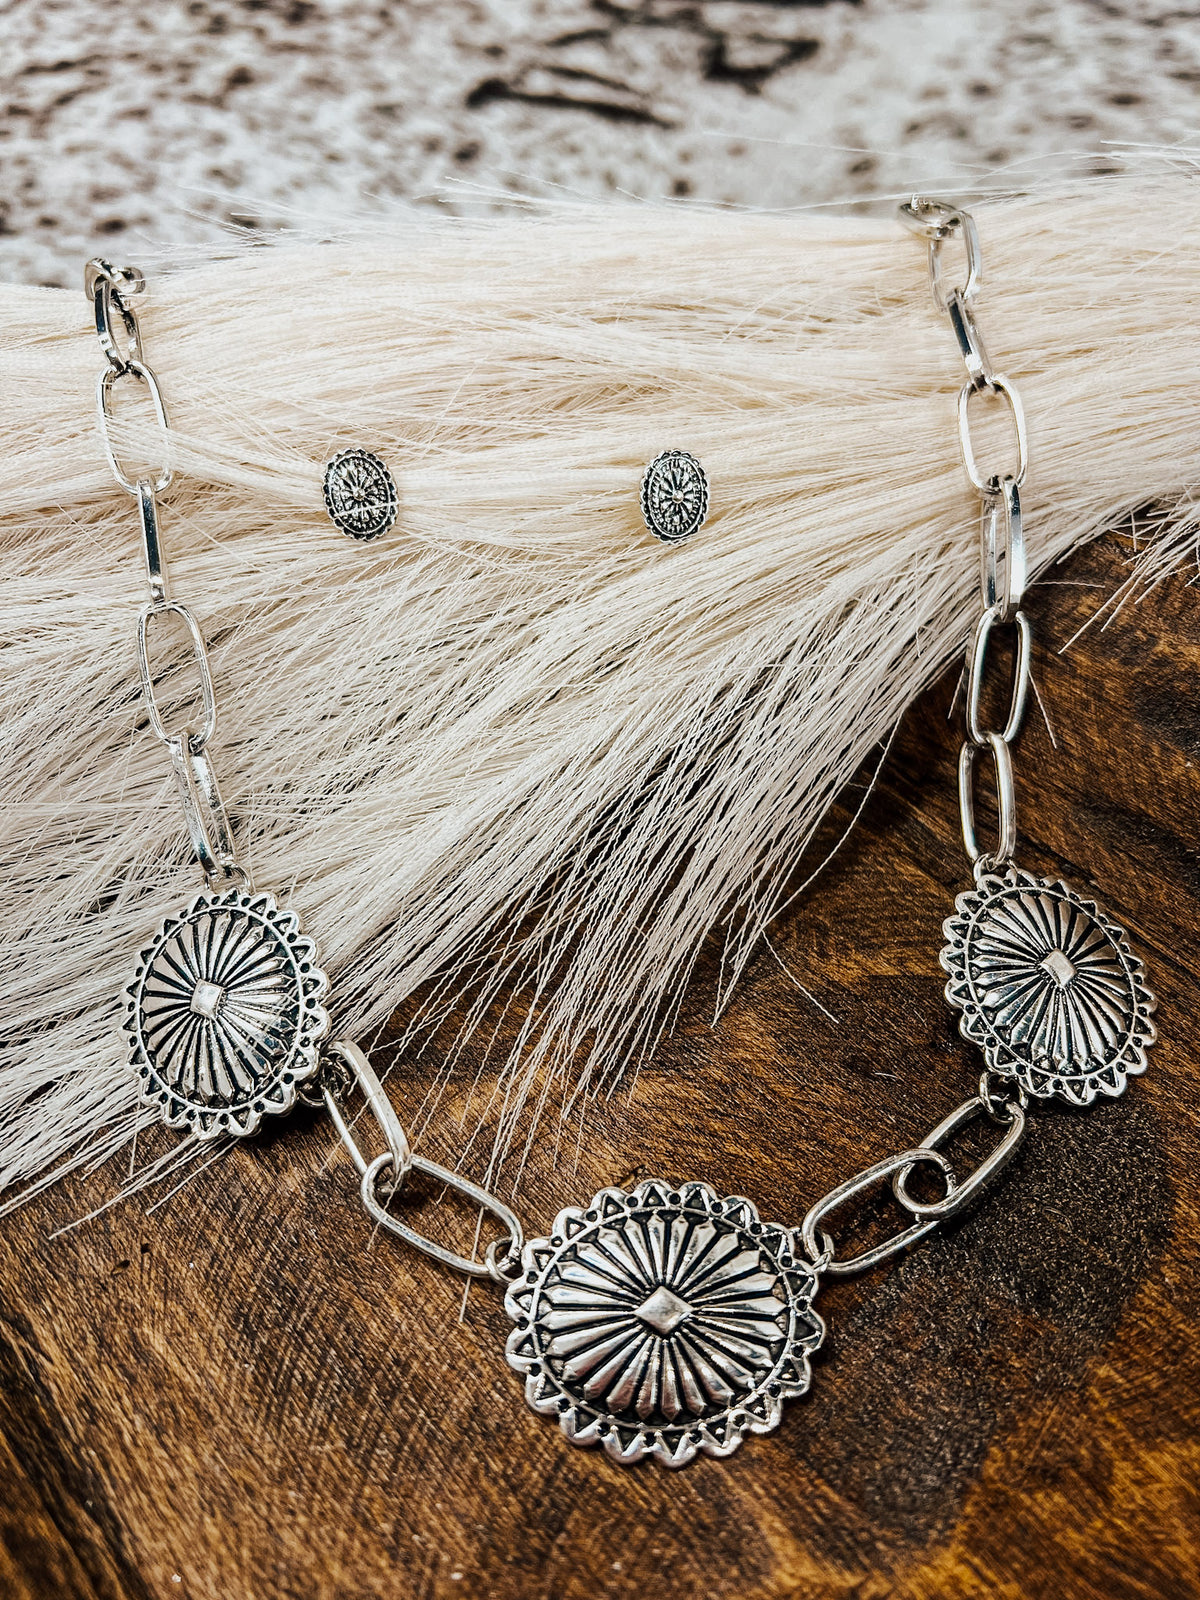 Cru Concho Necklace and Earrings